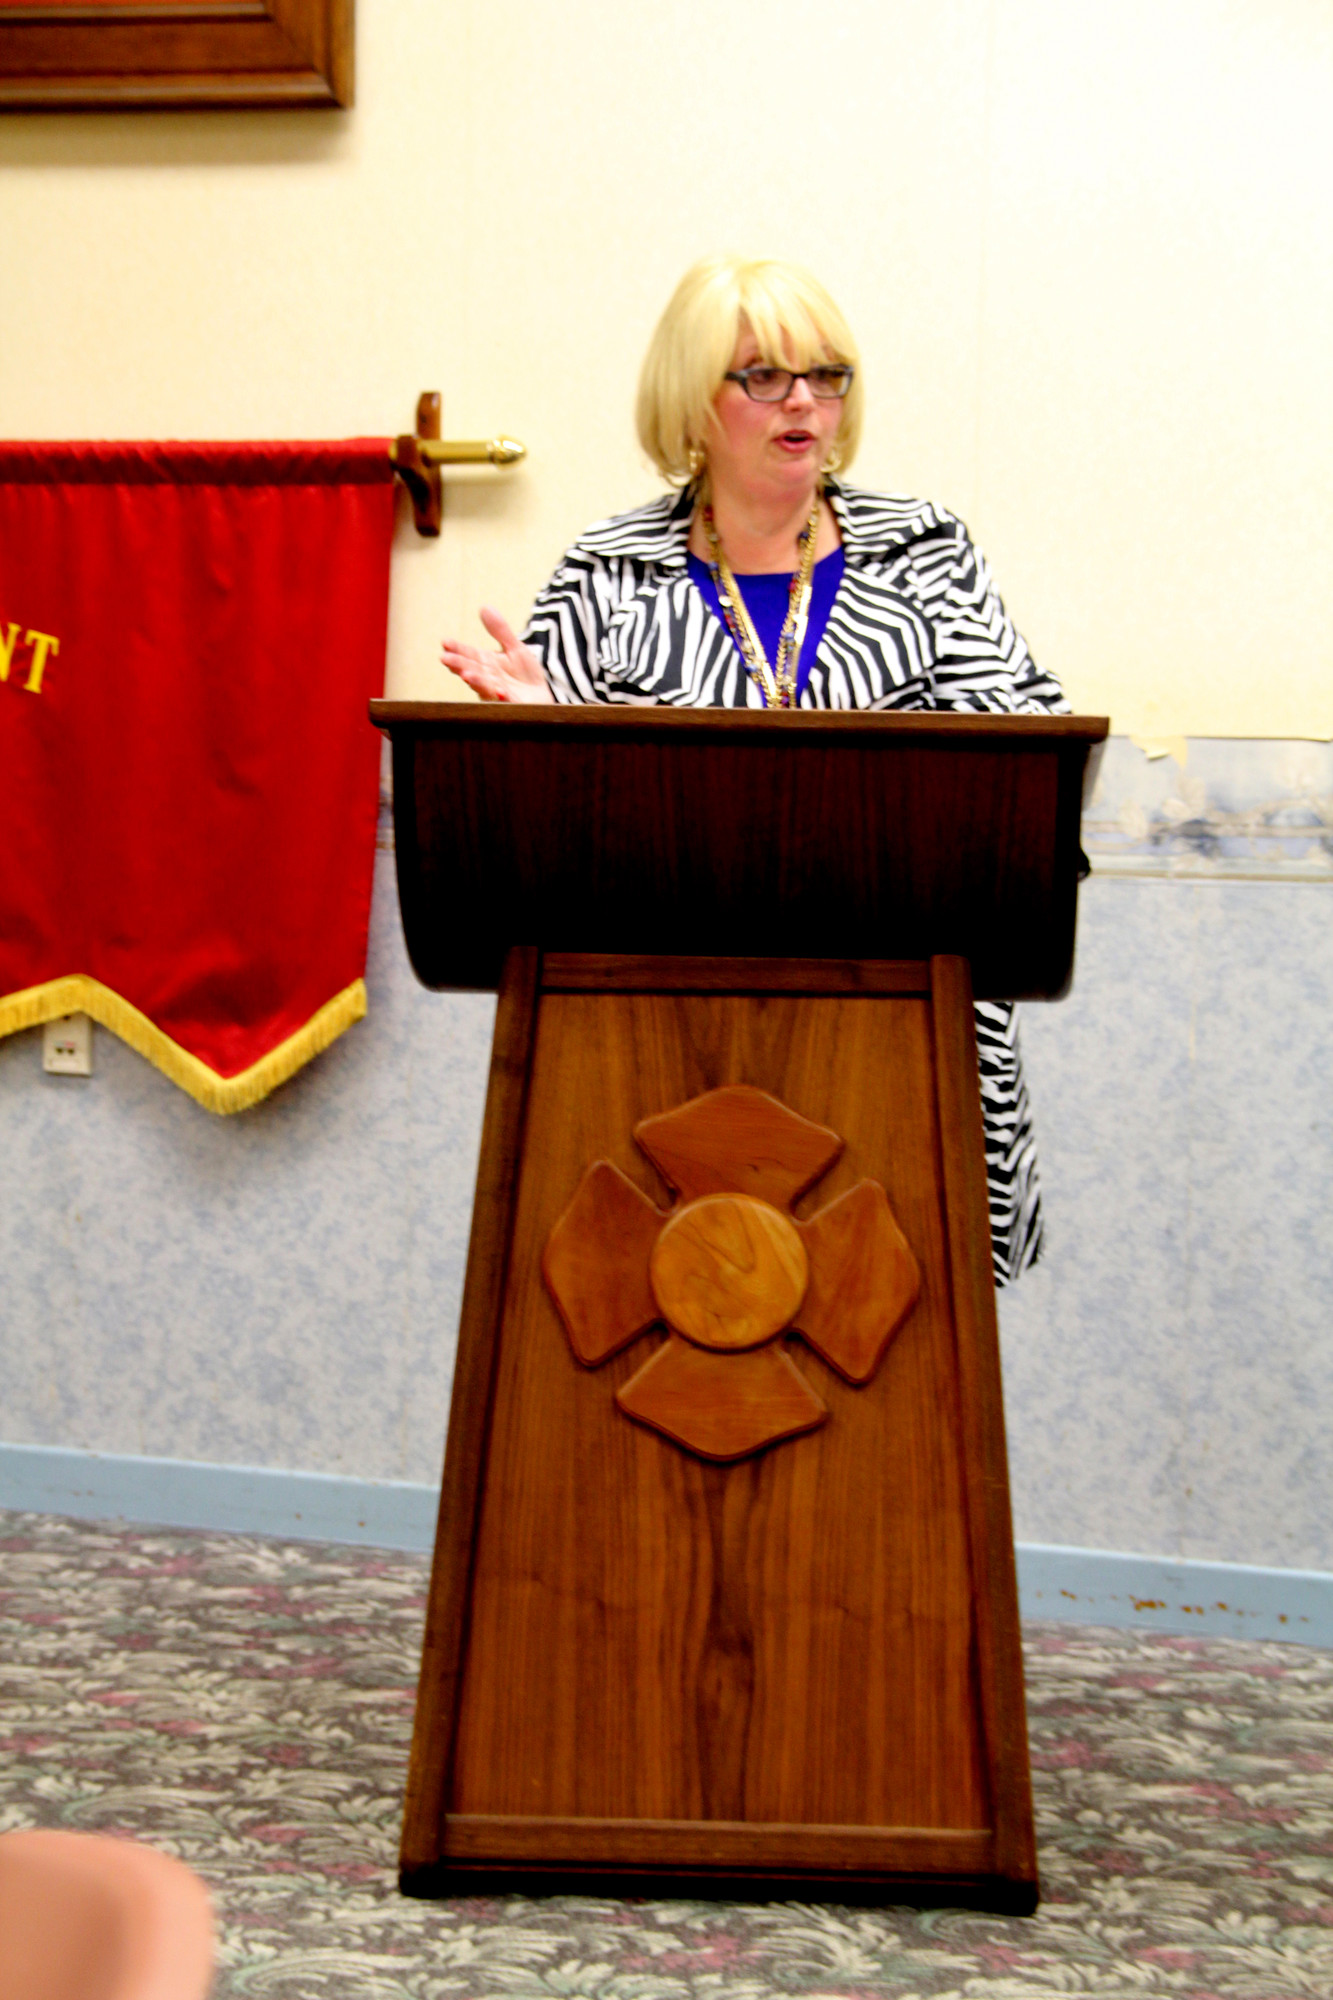 Julie Marchesella, president of the Nassau Council of Chambers, addressed the group.